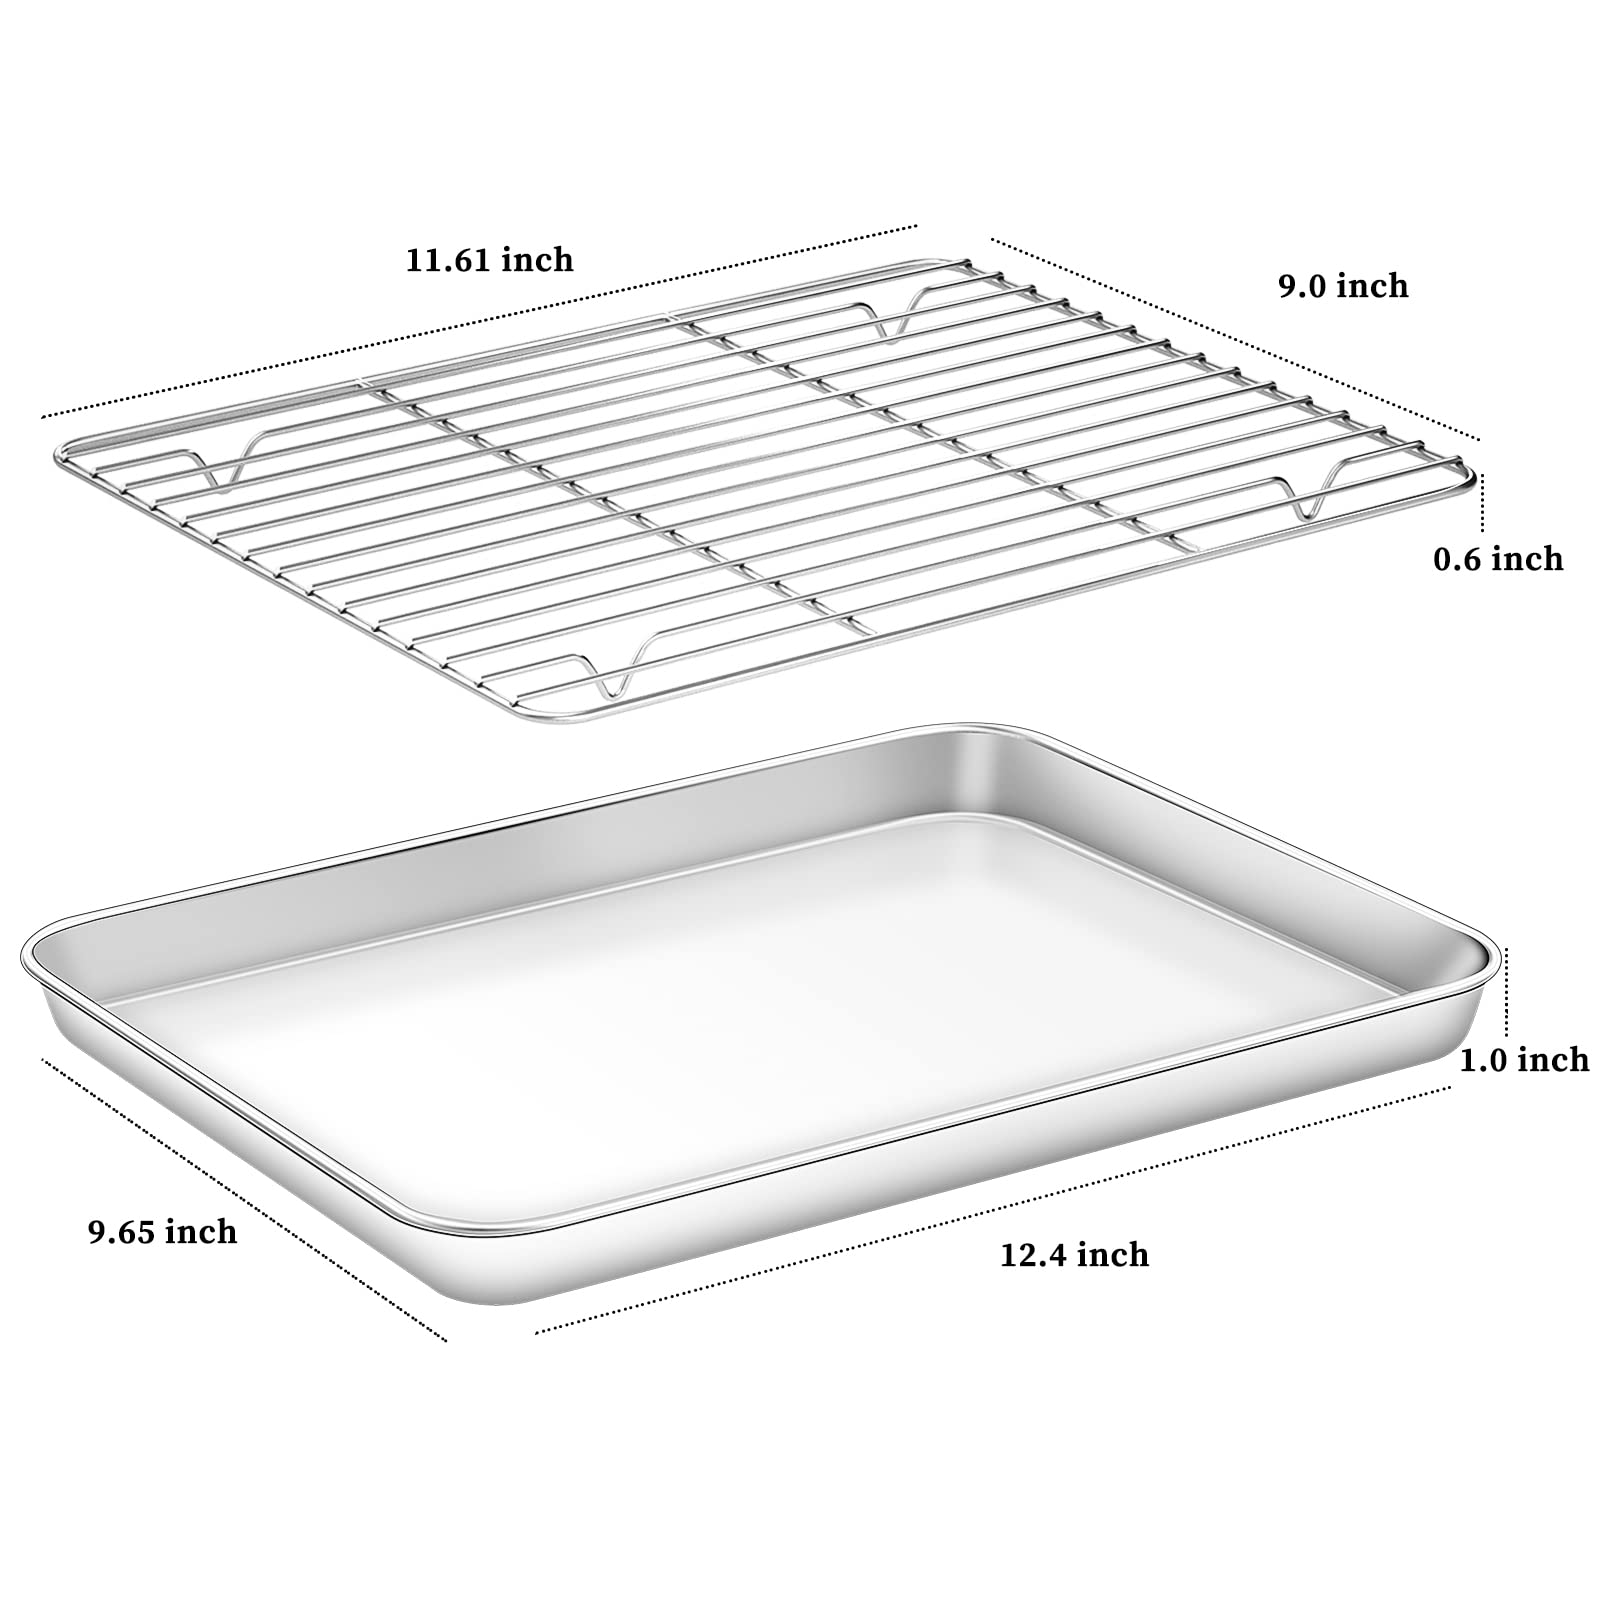 Deedro Baking Sheet with Rack Set [2 Sheets + 2 Racks], Stainless Steel Cookie Half Sheets Baking Pan Oven Tray with Cooling Rack, 12 x 10 x 1 Inch, Heavy Duty, Non-toxic, Easy Clean